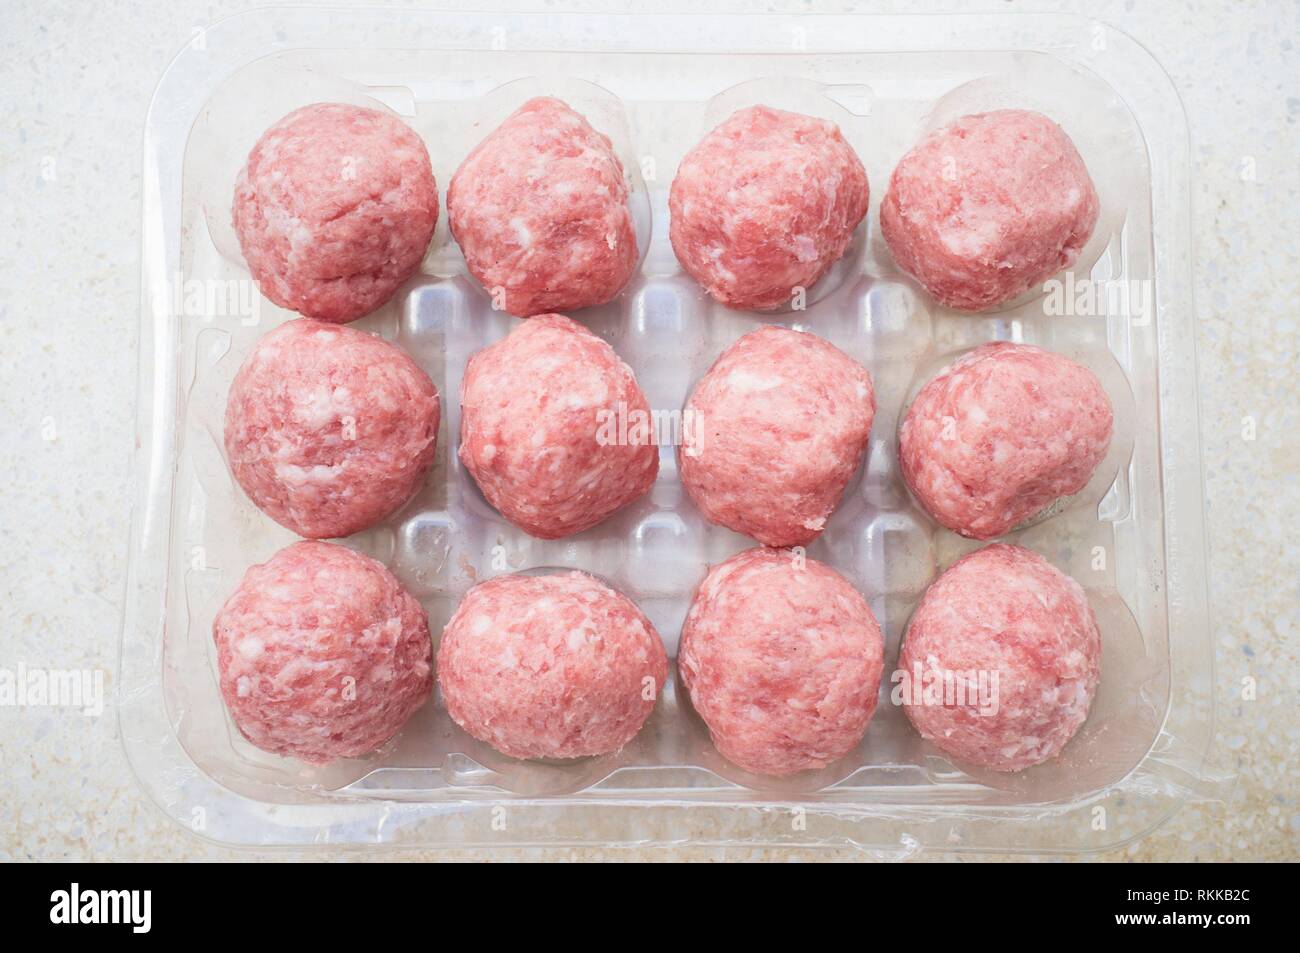 Pork meat balls in his package. Overhead view. Stock Photo